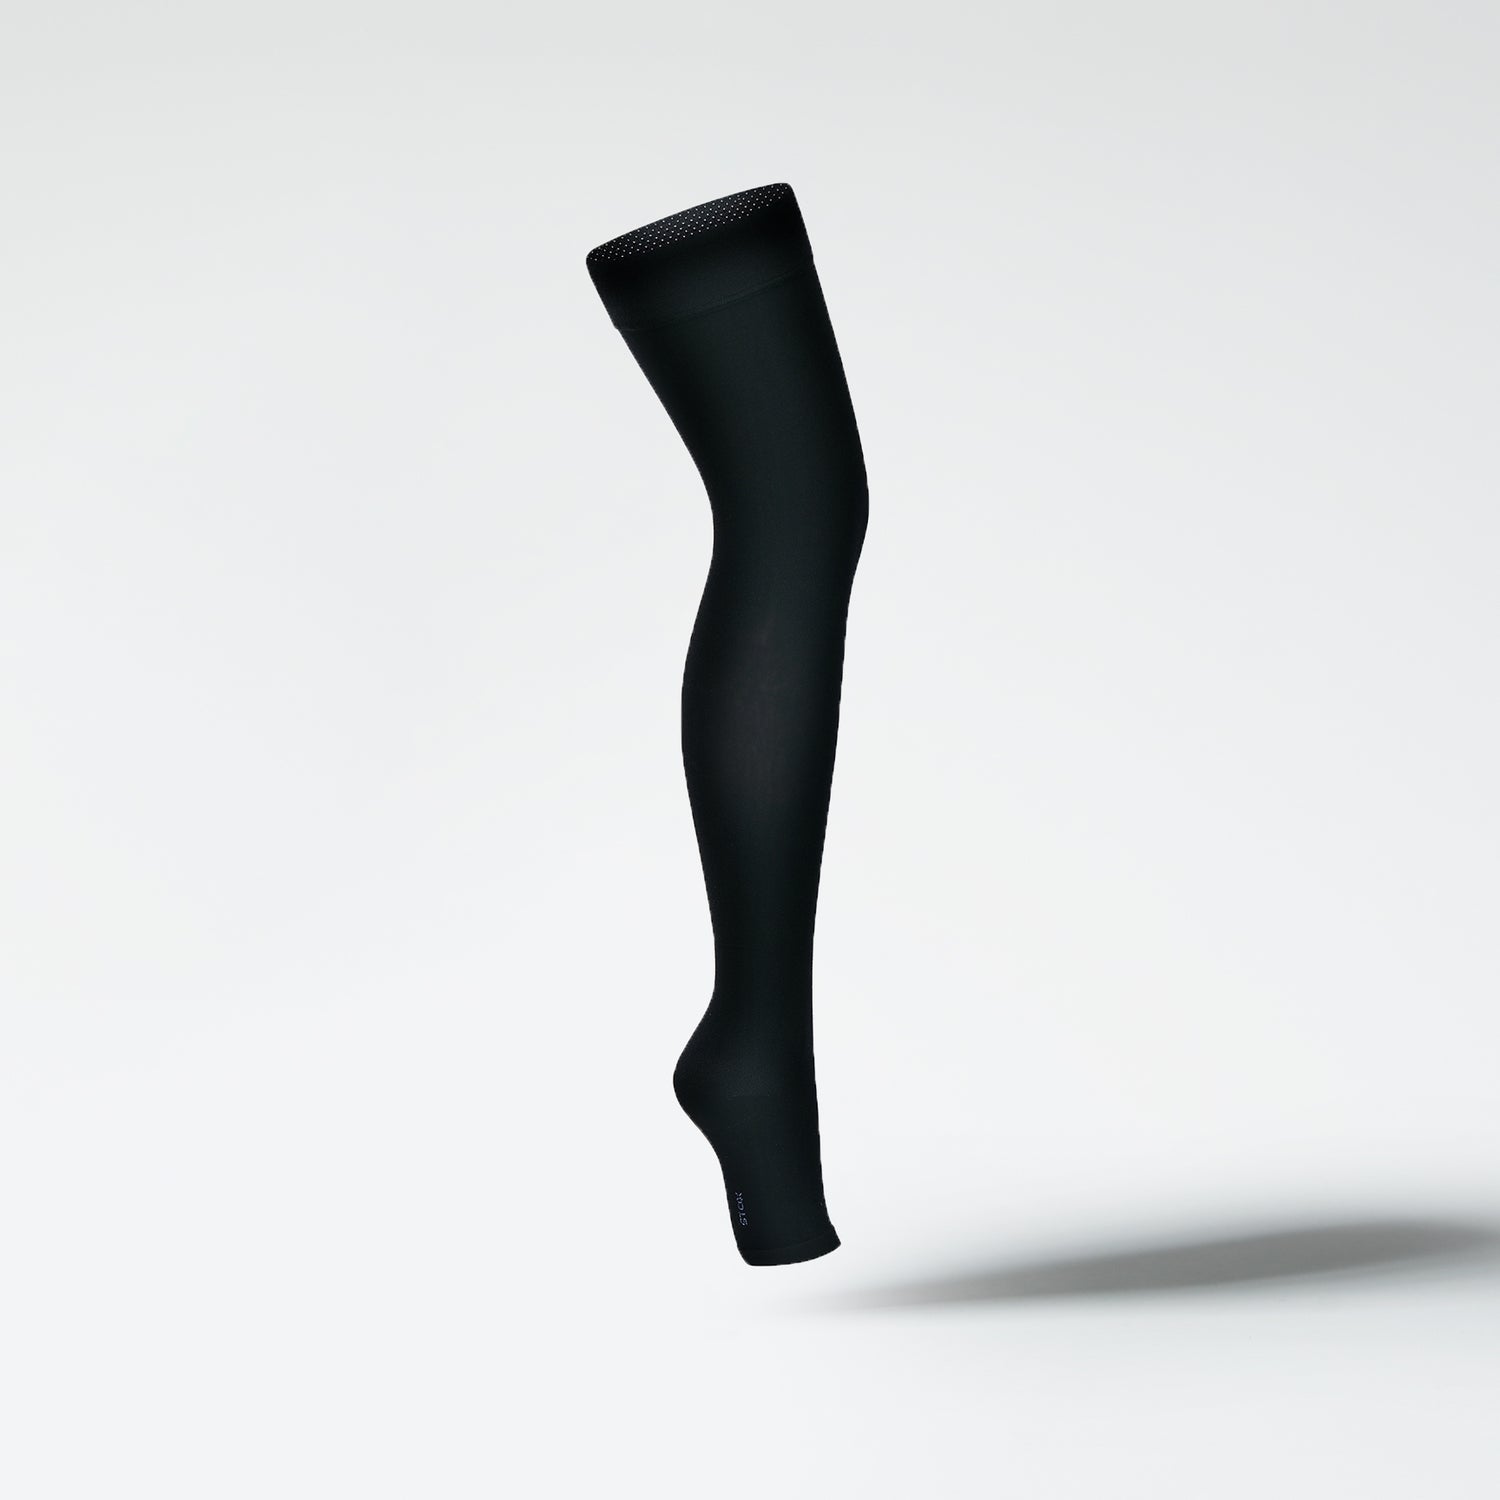 Side view of a medical thigh high stocking in black.